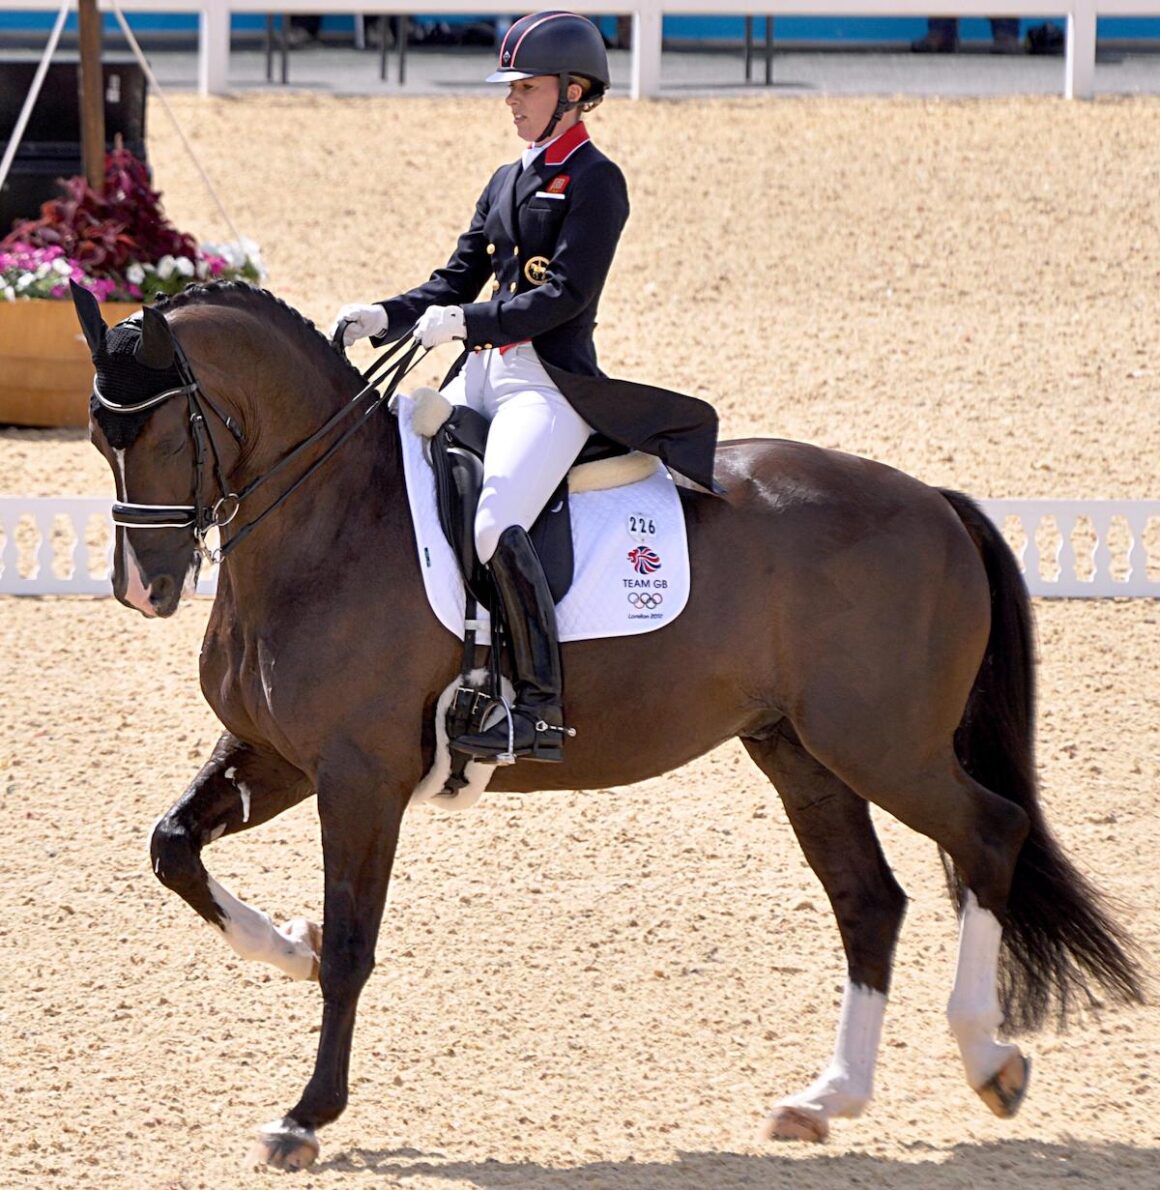 Charlotte Dujardin and Valegro in the ring